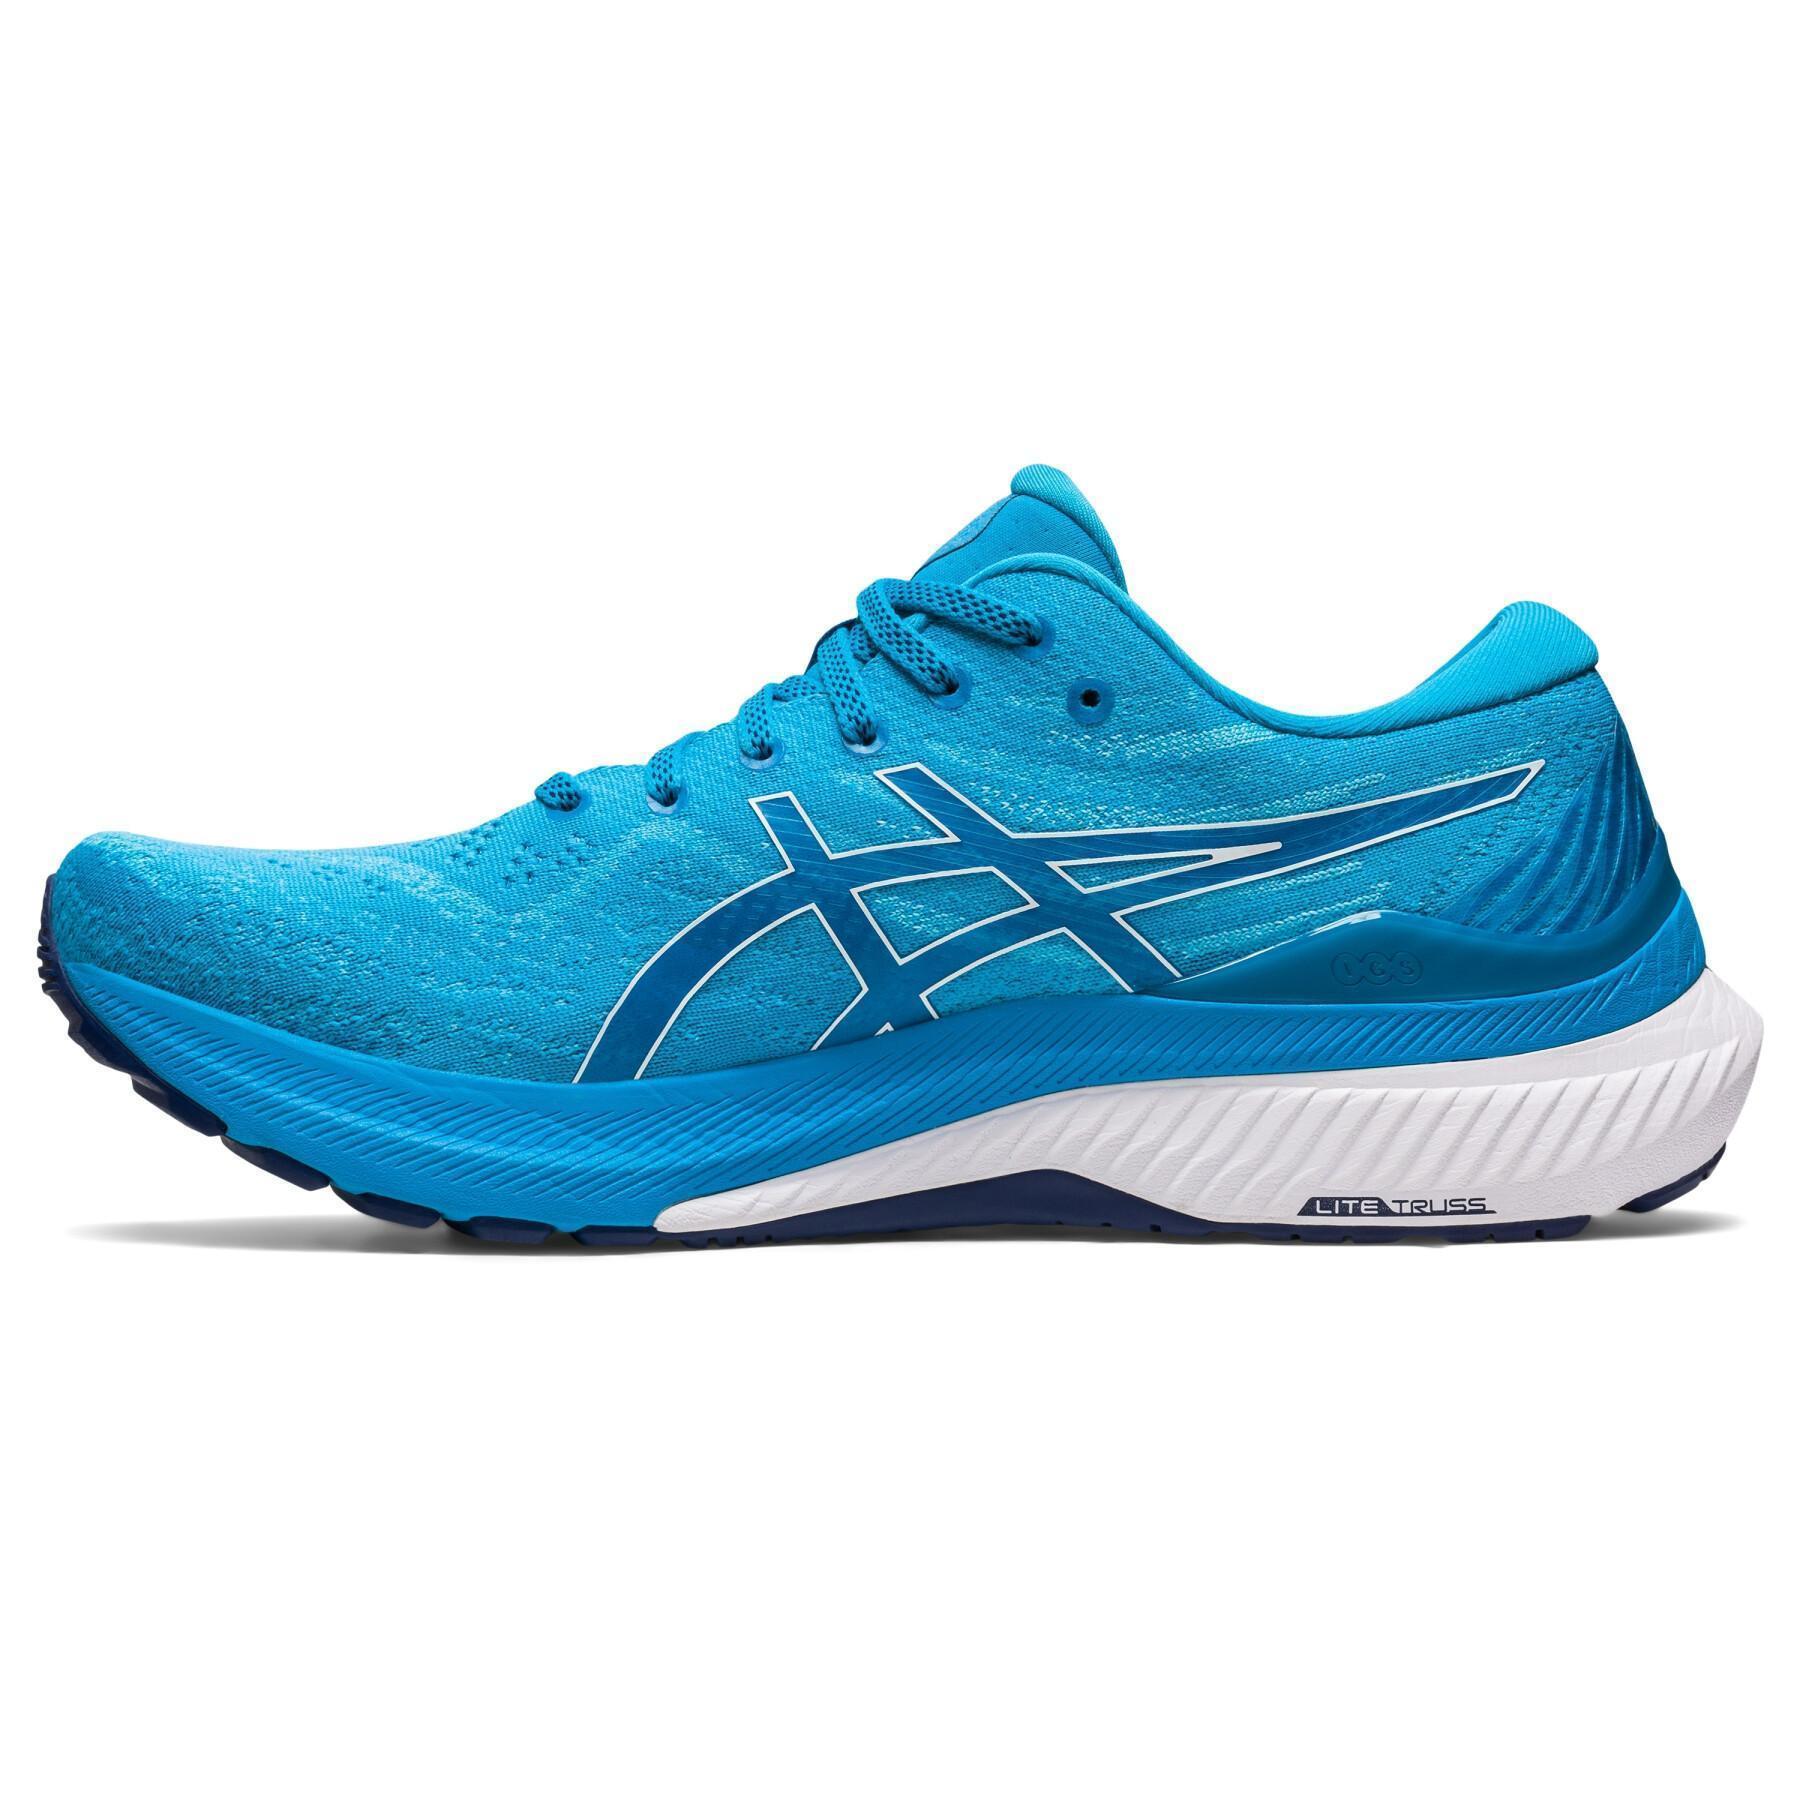 Shoes from running Asics Gel-Kayano 29